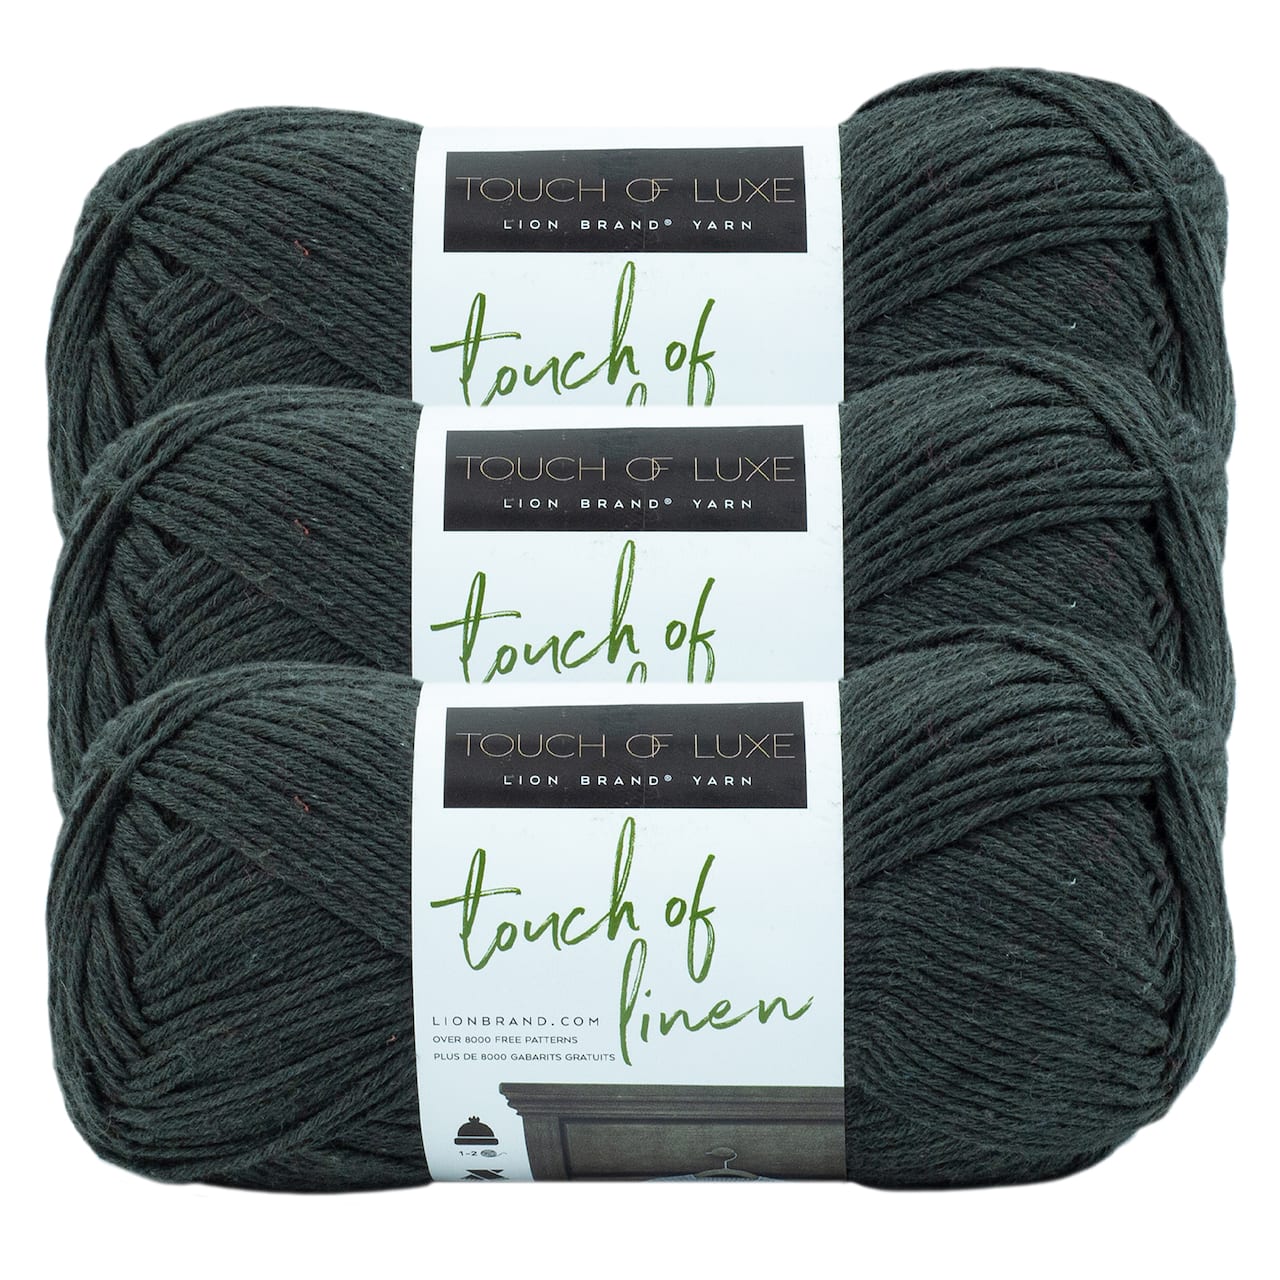 3 Pack Lion Brand® Touch of Linen Yarn